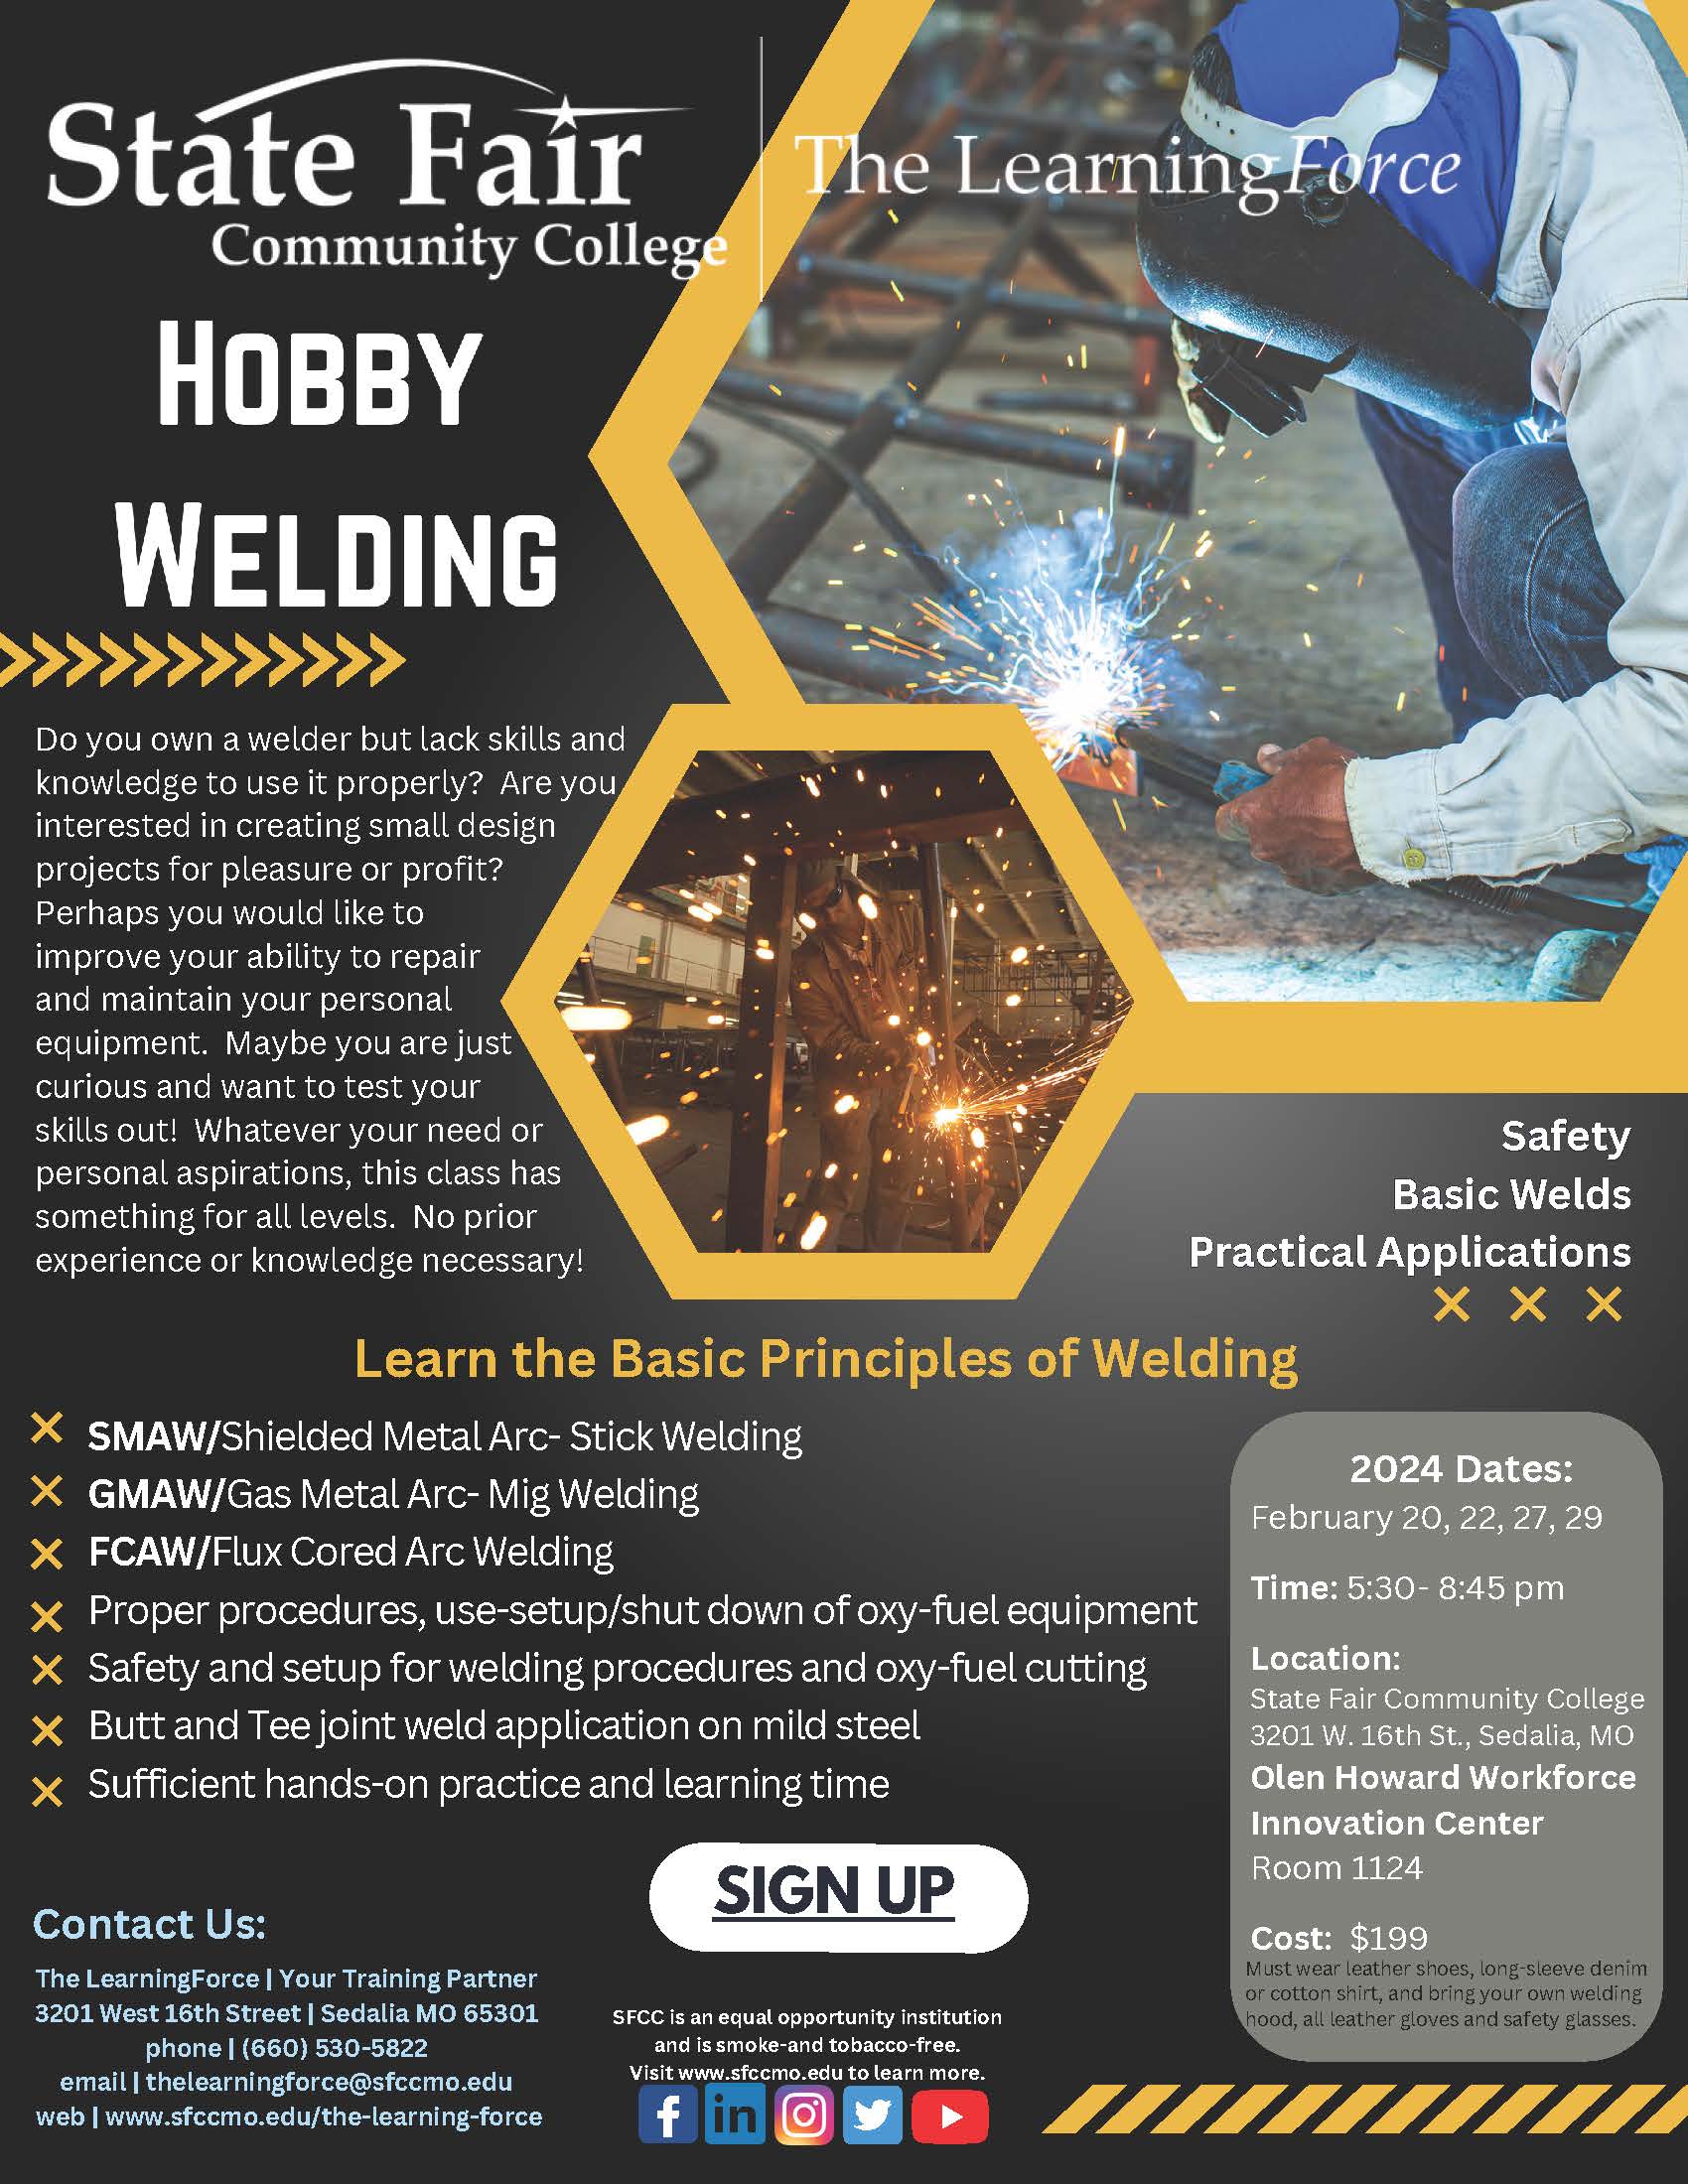 Read more about SFCC to Offer a 15-hour Hobby Welding Training